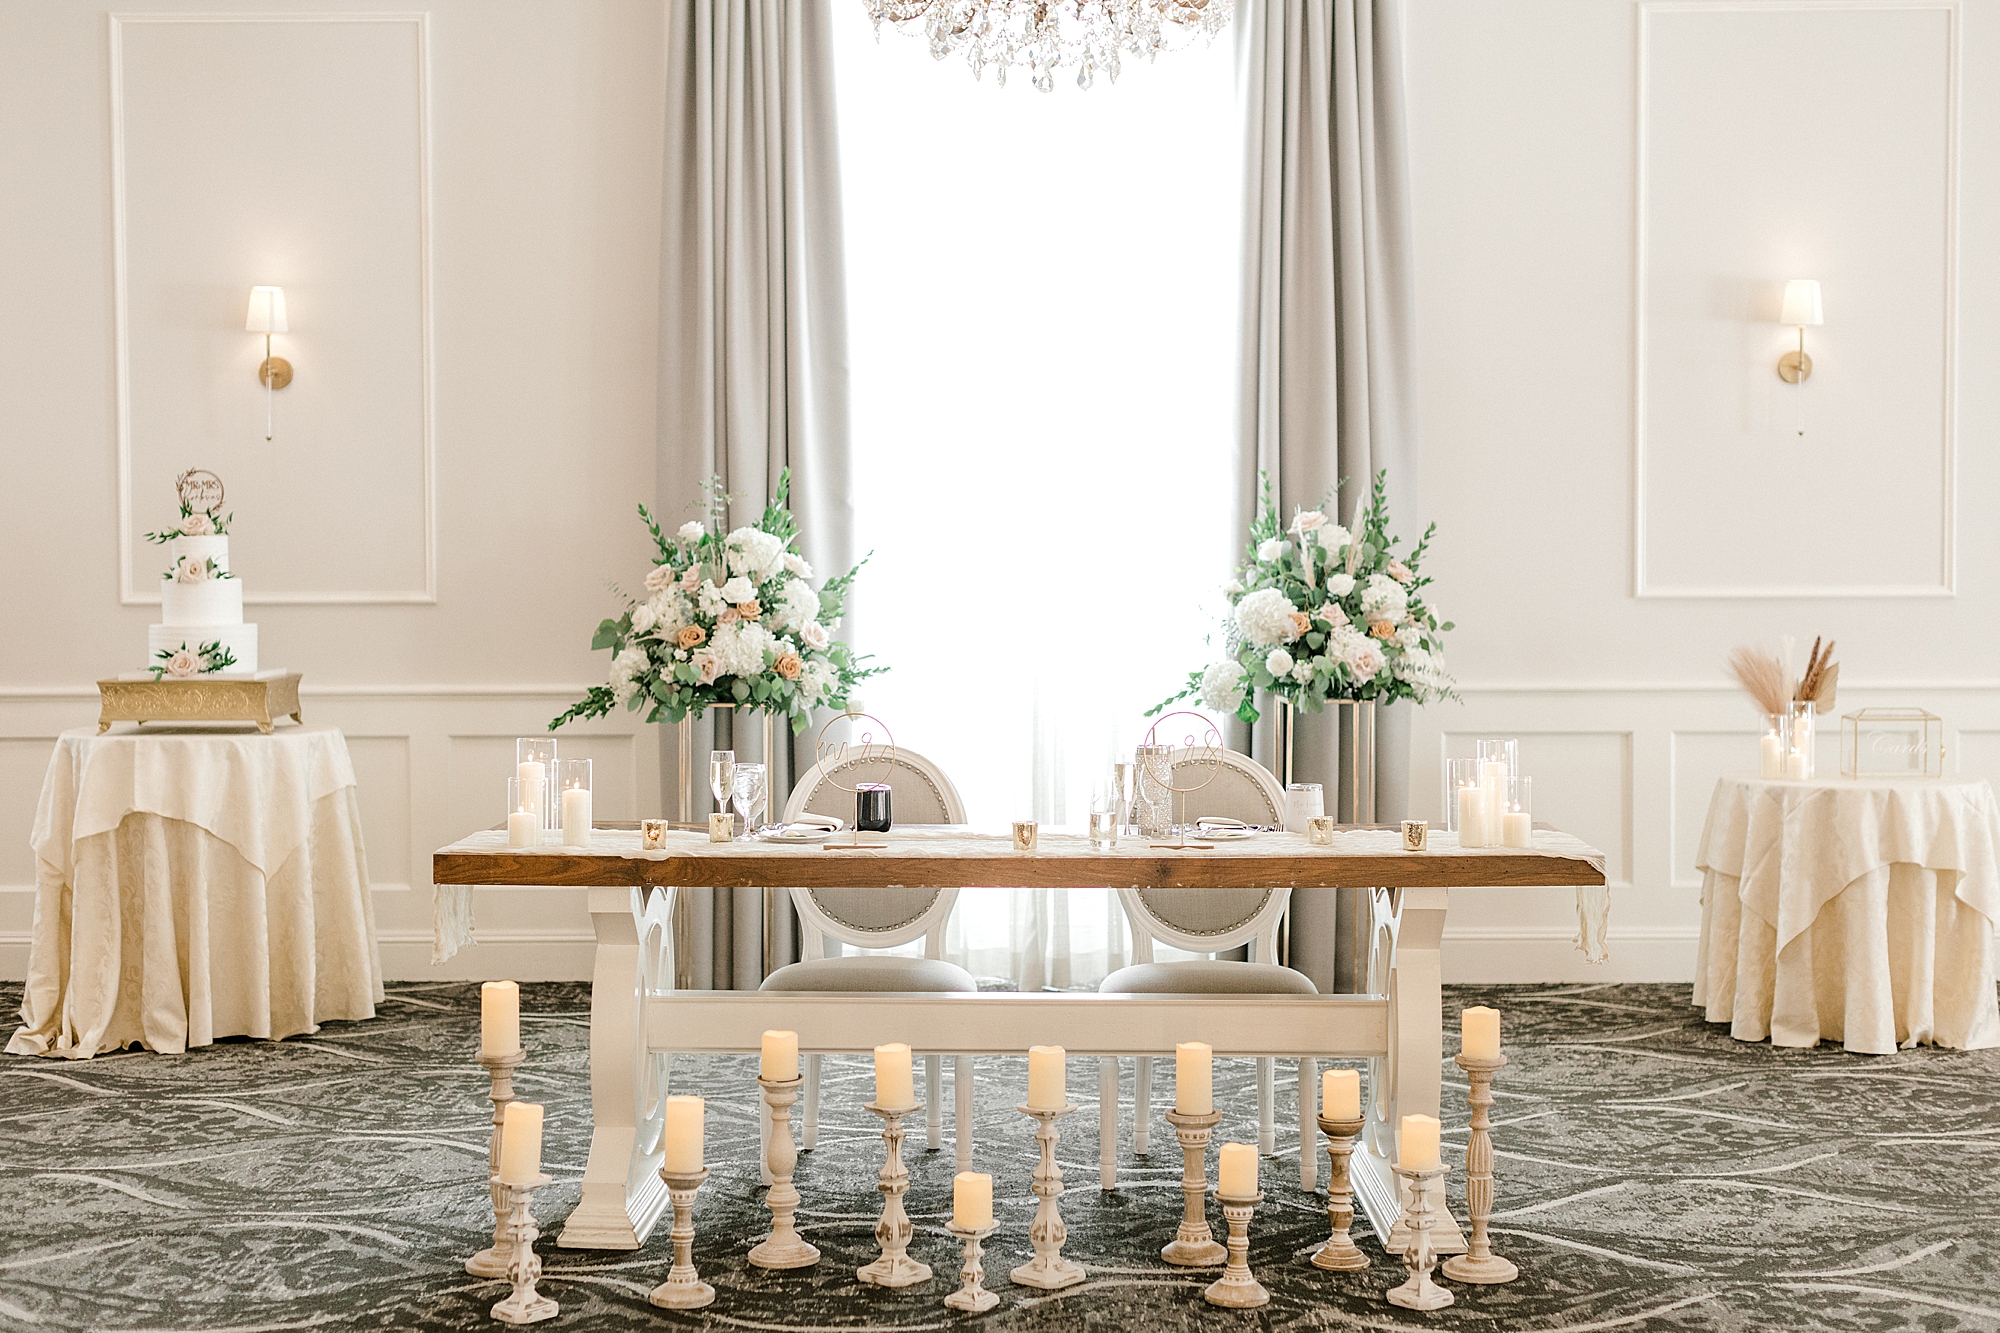 sweetheart table with flowers and candles underneath at wedding reception at the Mansion at Mountain Lakes